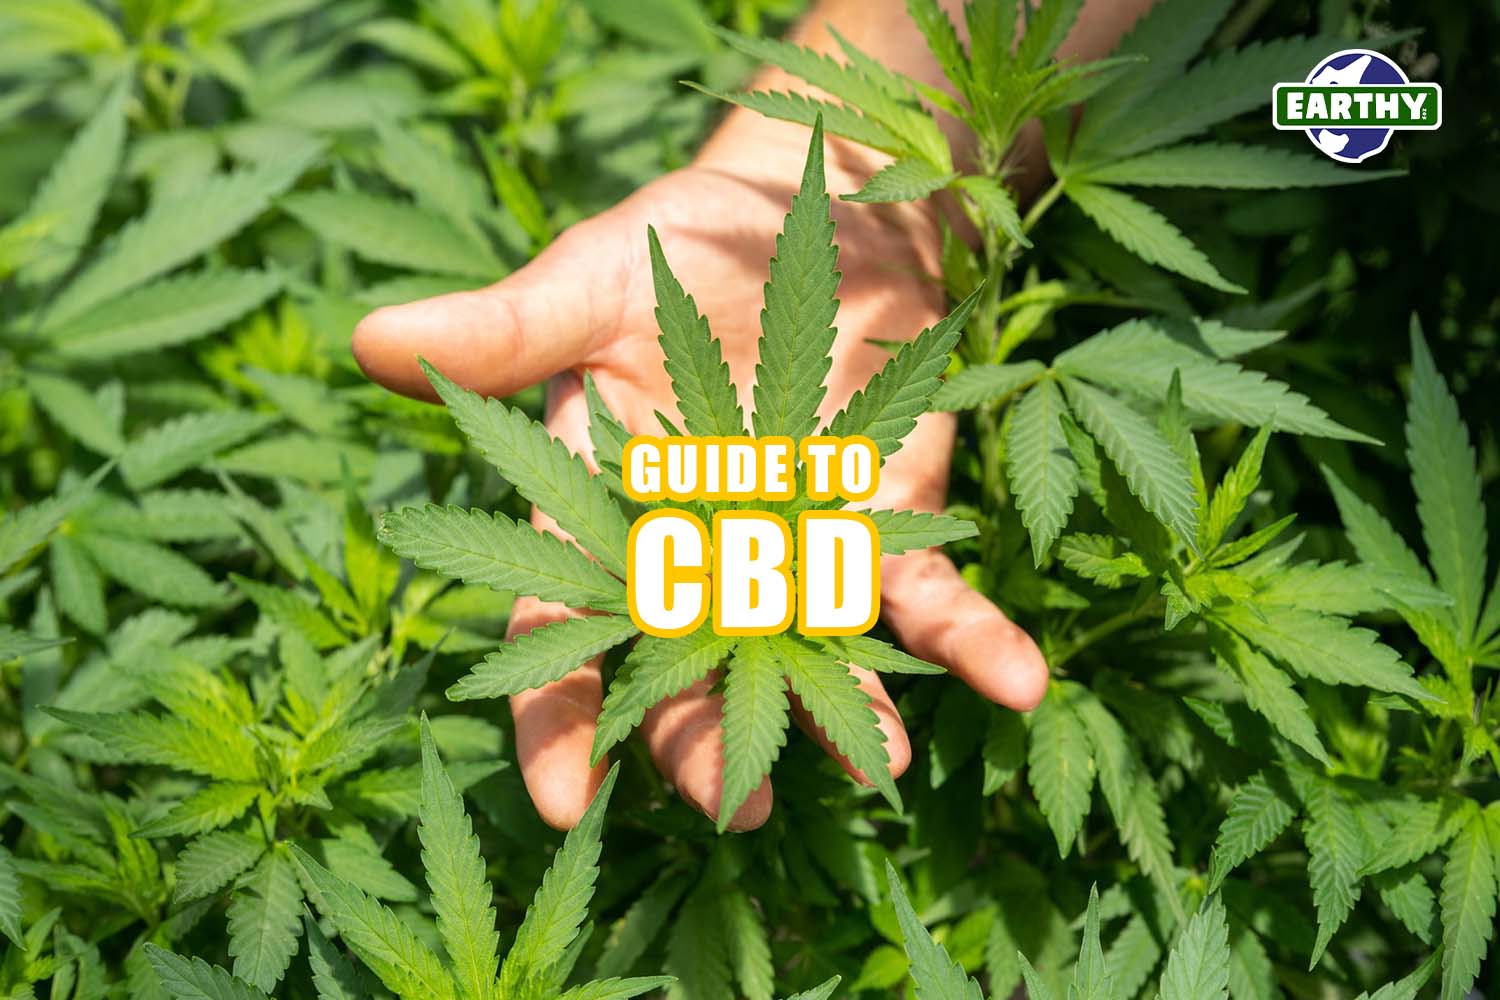 Hand holding live cannabis plant in a field of hemp